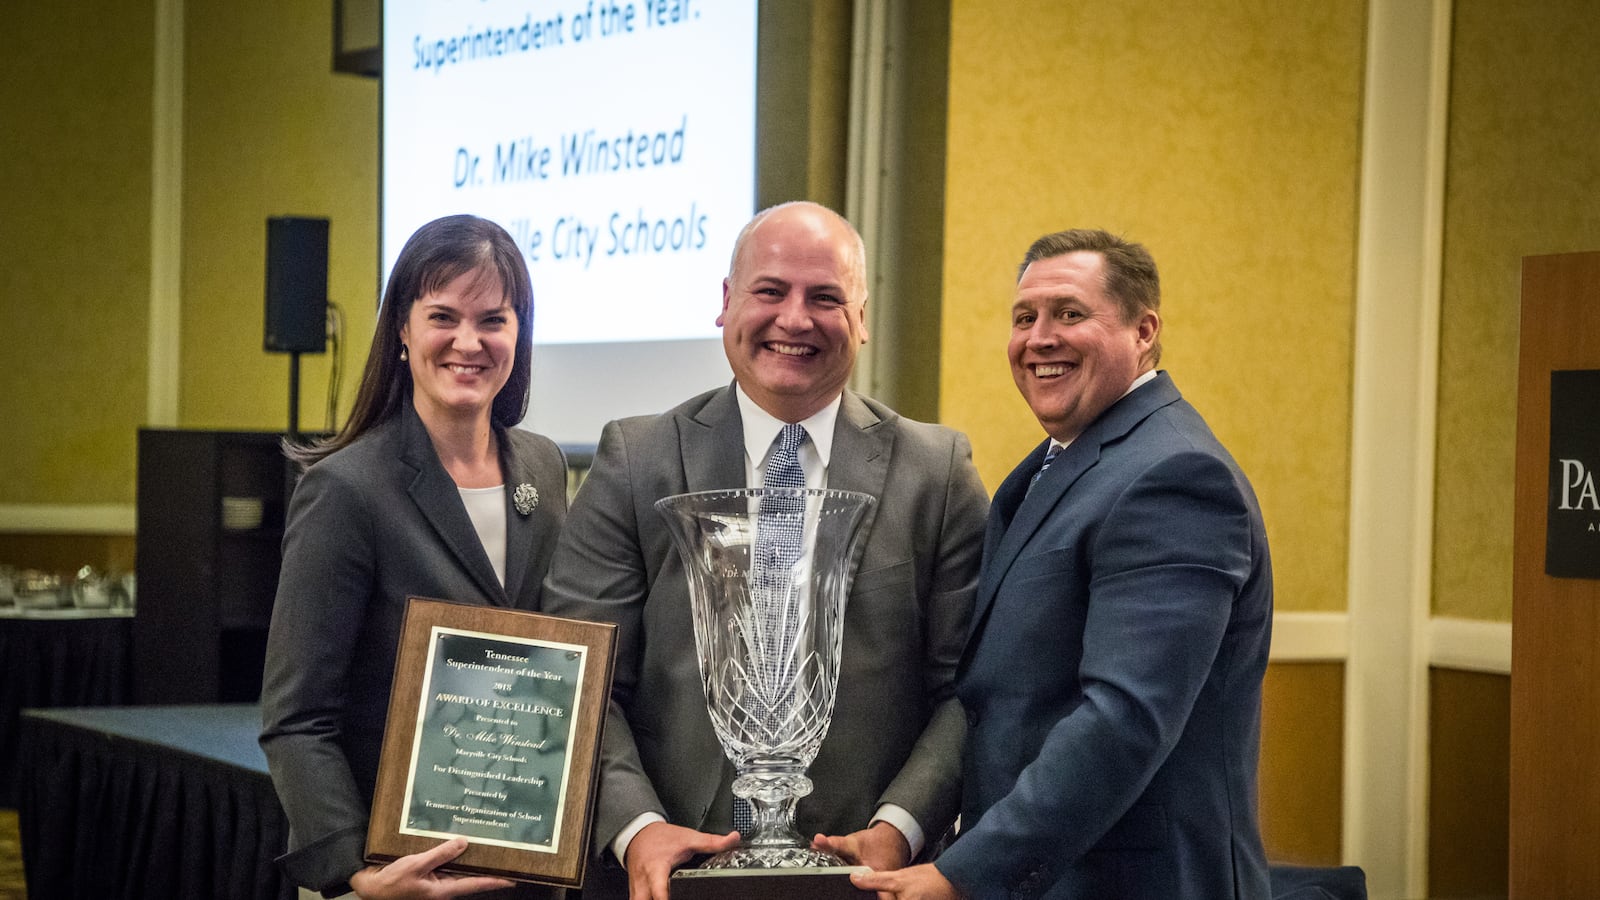 Maryville City Schools Superintendent Mike Winstead (center) receives the 2018 Tennessee Superintendent of the Year award from Education Commissioner Candice McQueen and Dale Lynch, executive director of the Tennessee Organization of School Superintendents.